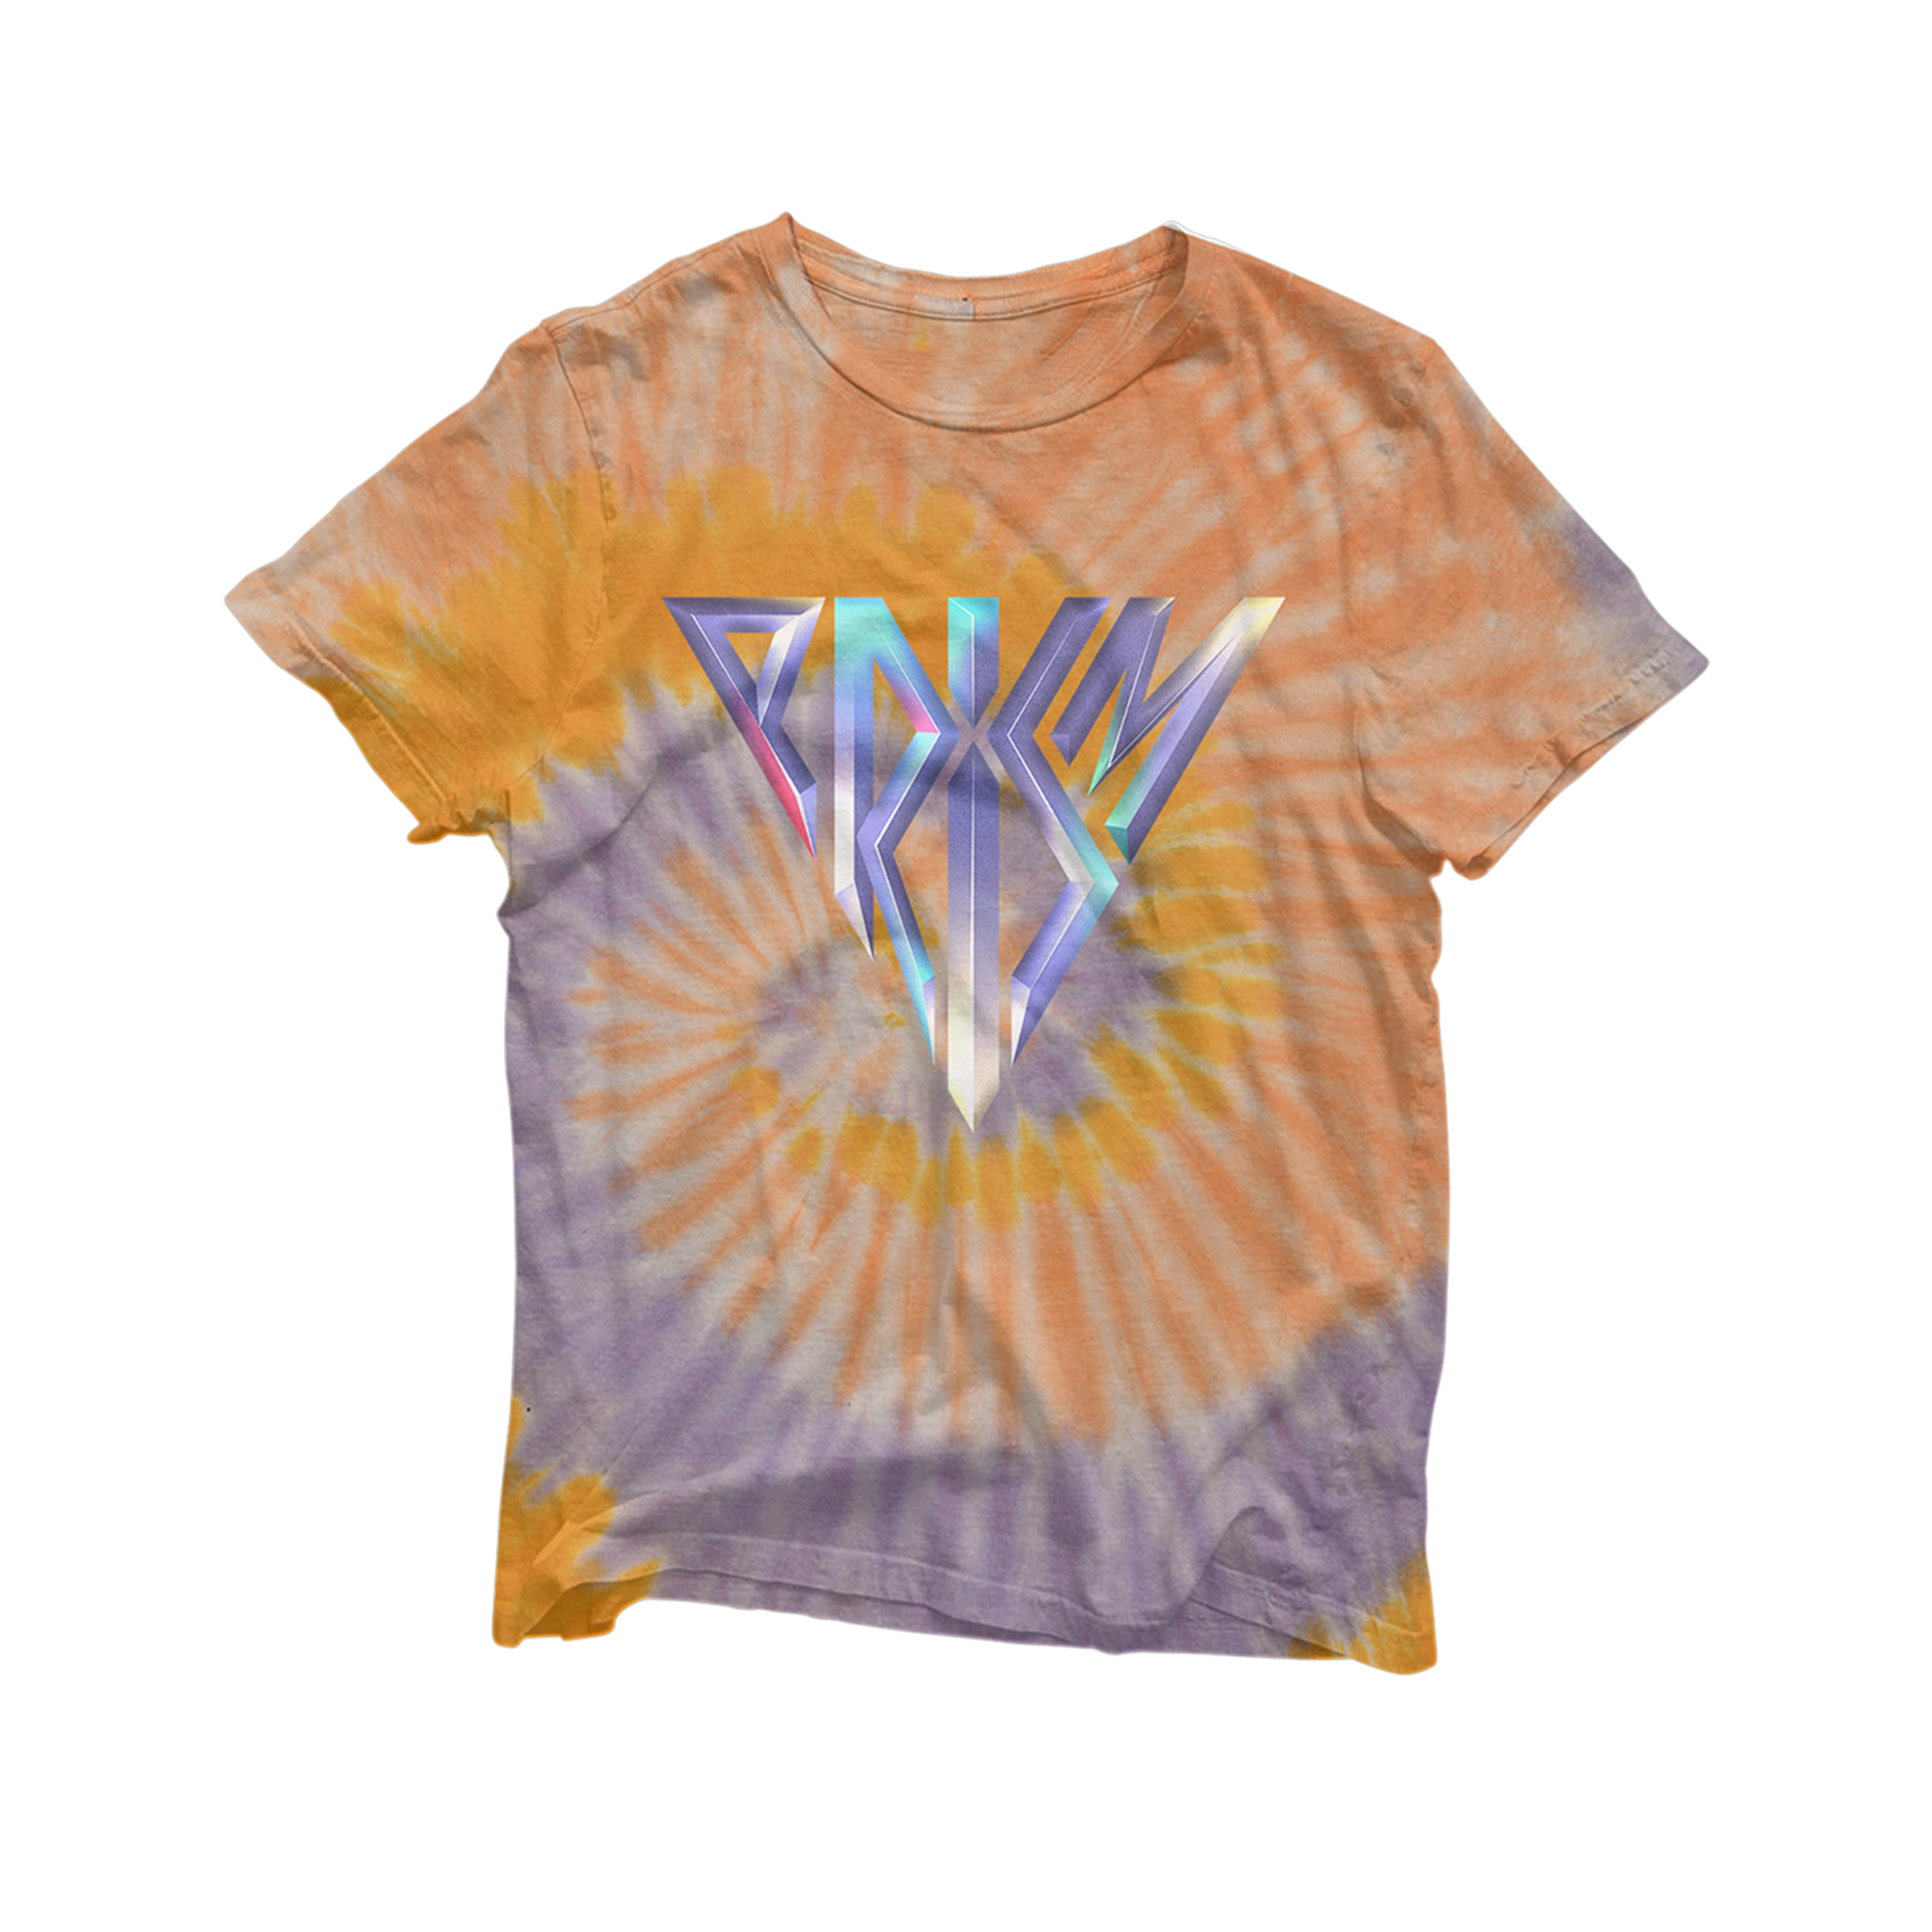 Katy Perry - PRISM T-Shirt